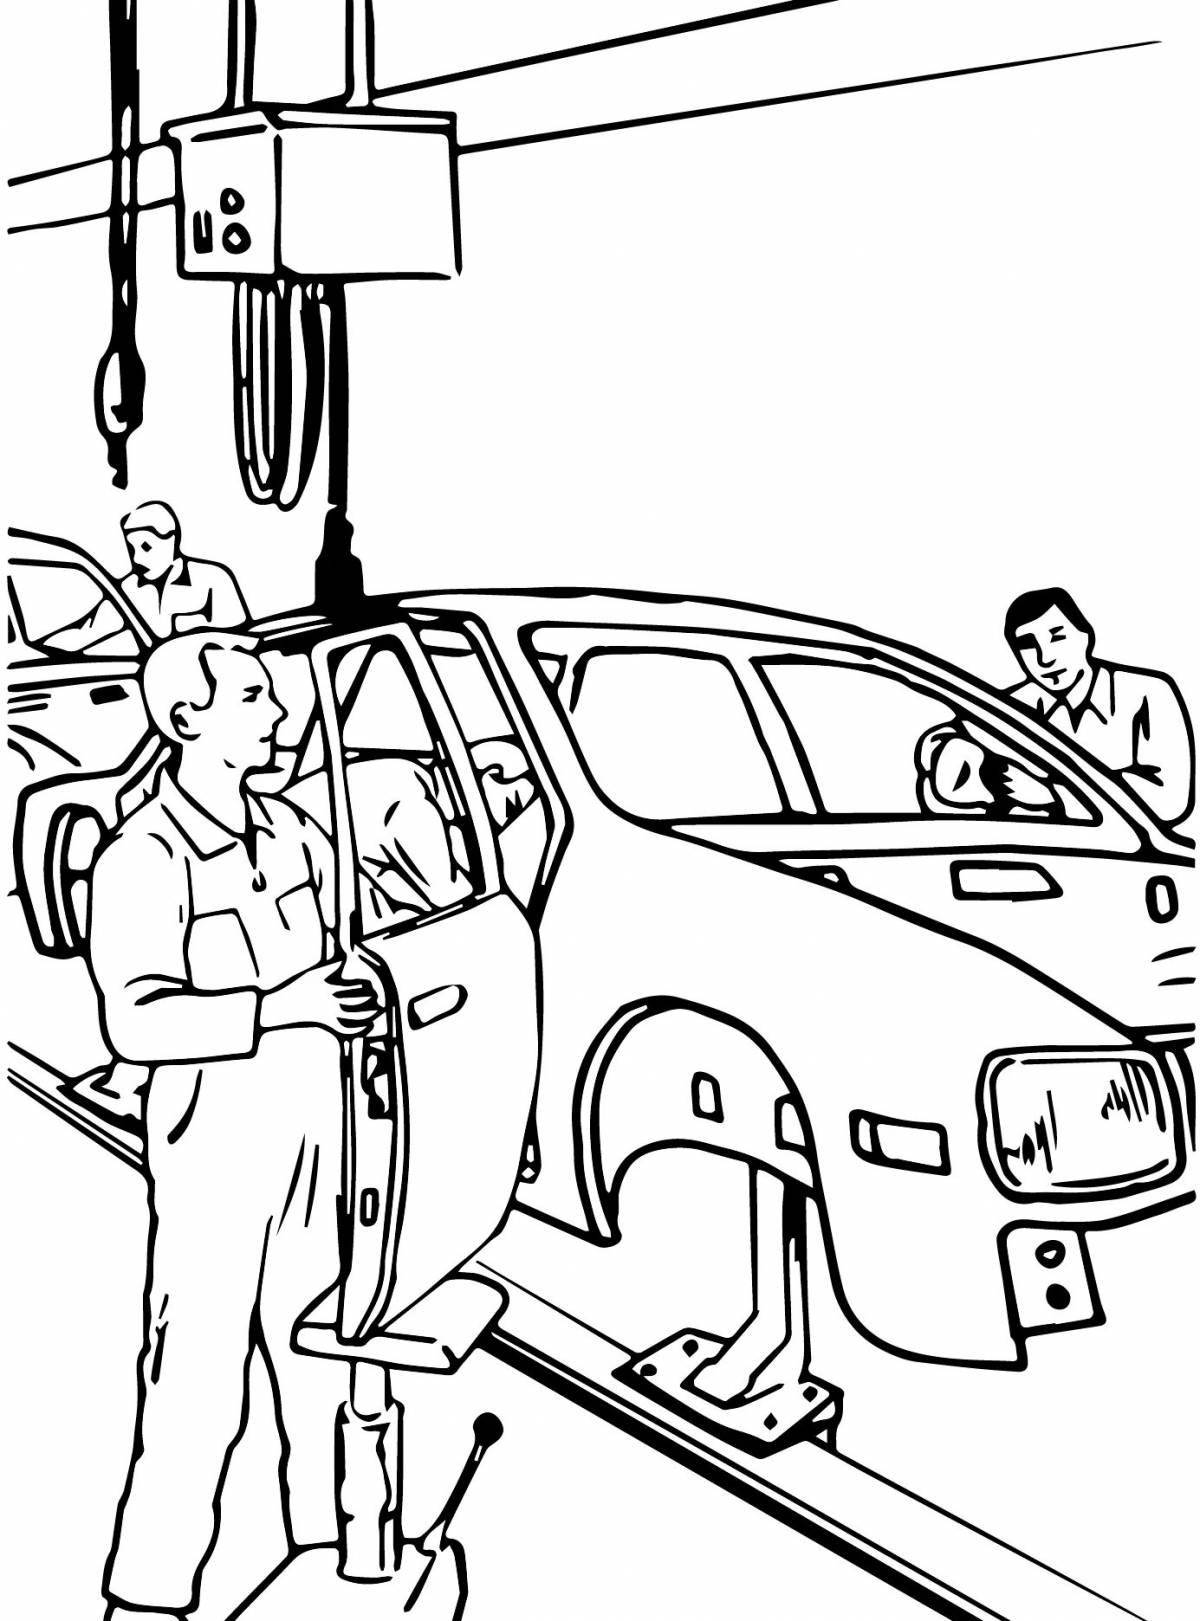 Attractive mechanic coloring book